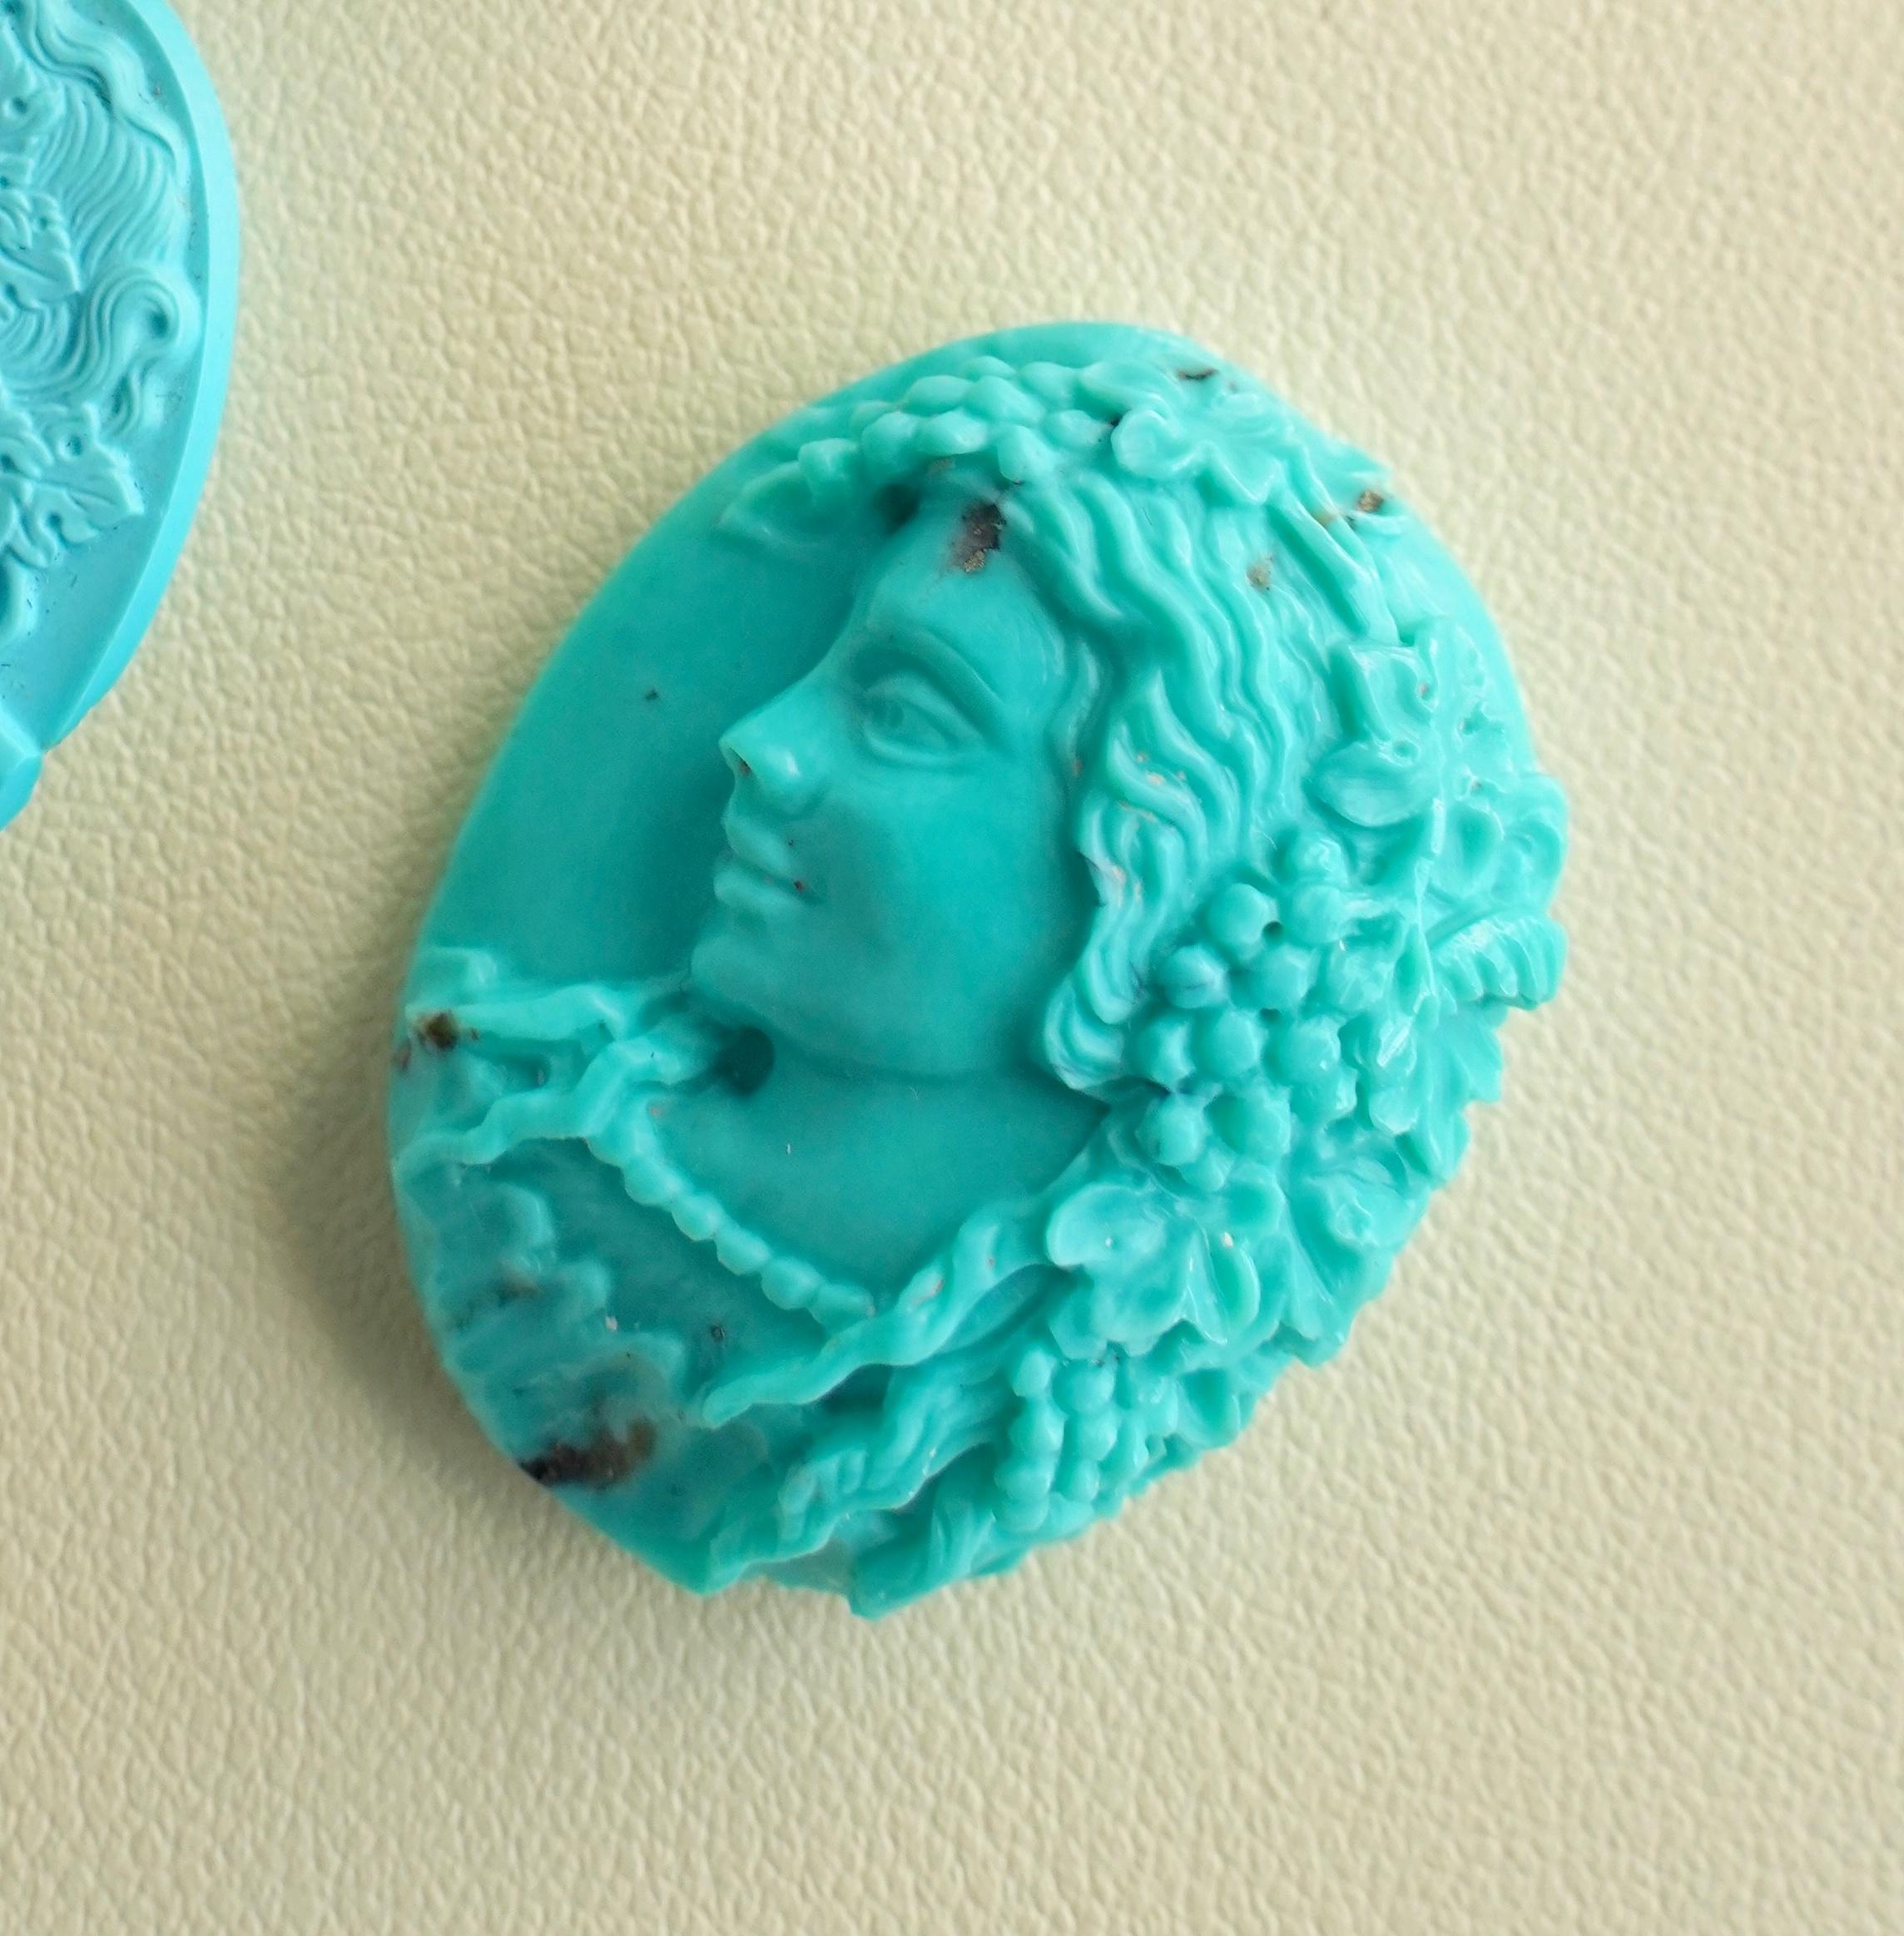 Our one-of-a-kind hand-carved Lady portrait cameo on natural Arizona Turquoise is a breathtaking work of art crafted by our expert lapidary artist in Jaipur. With exceptional skill and an eye for detail, the lapidary artist has transformed a raw